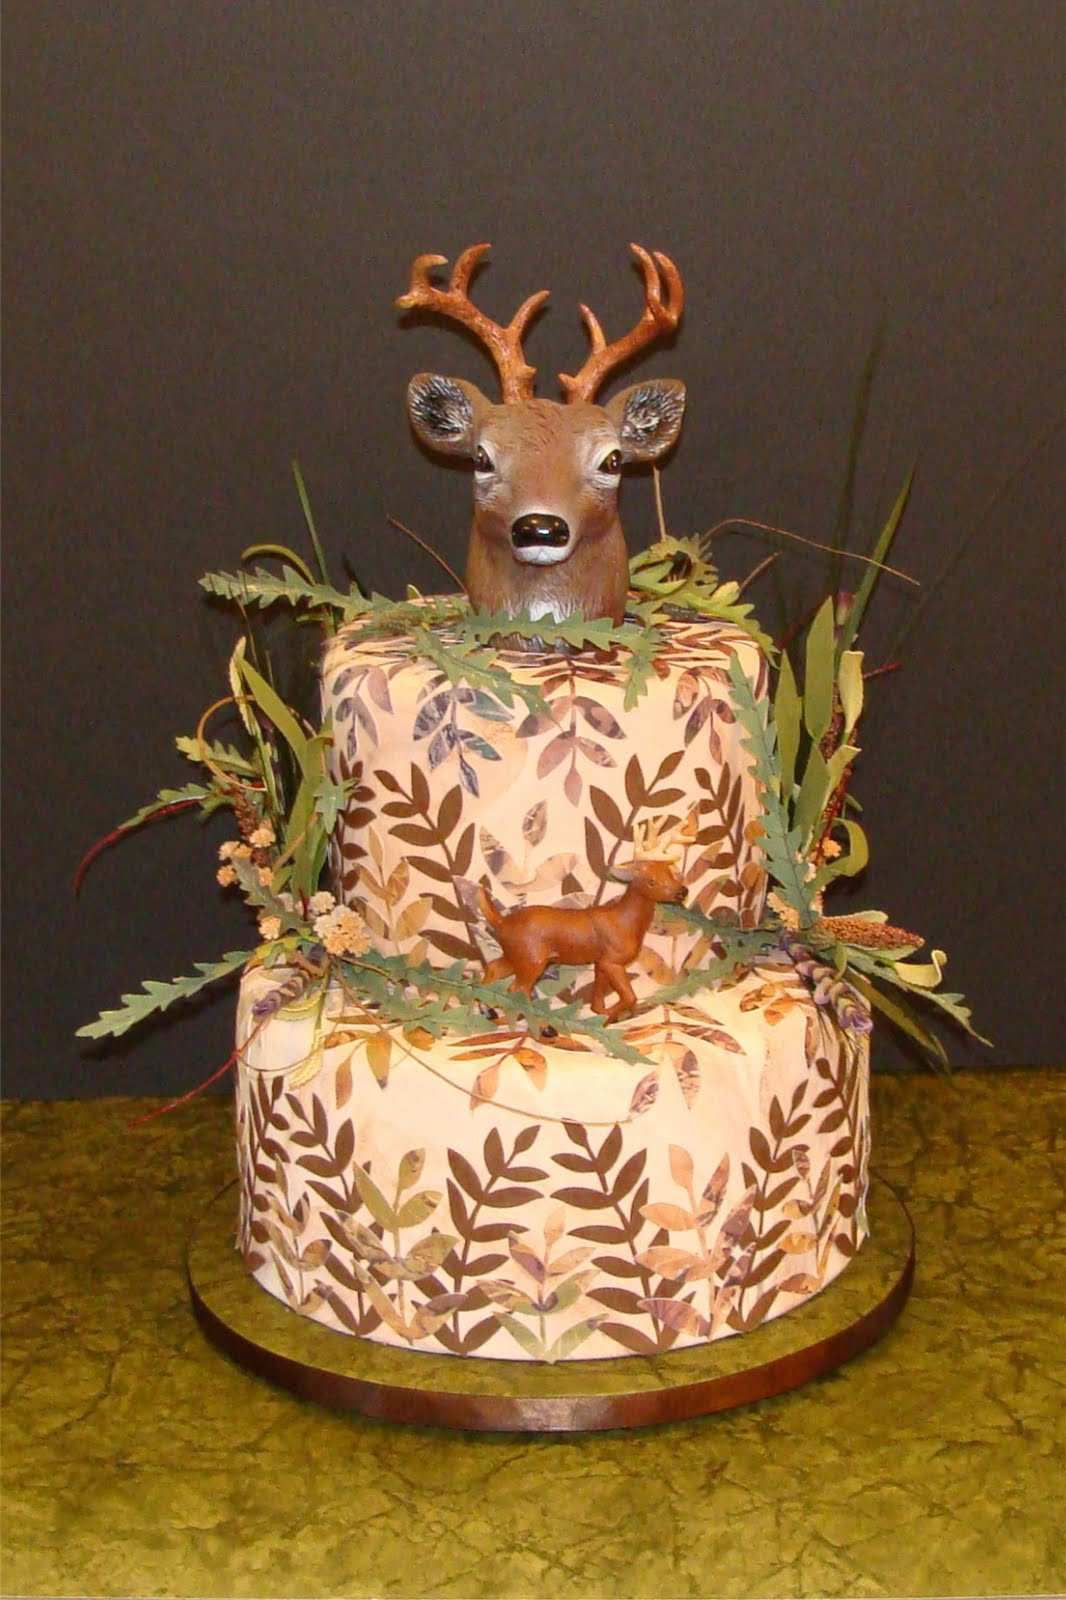 Deer Birthday Cake
 Creative Designs For Cakes Great Deal on Cake Decorating